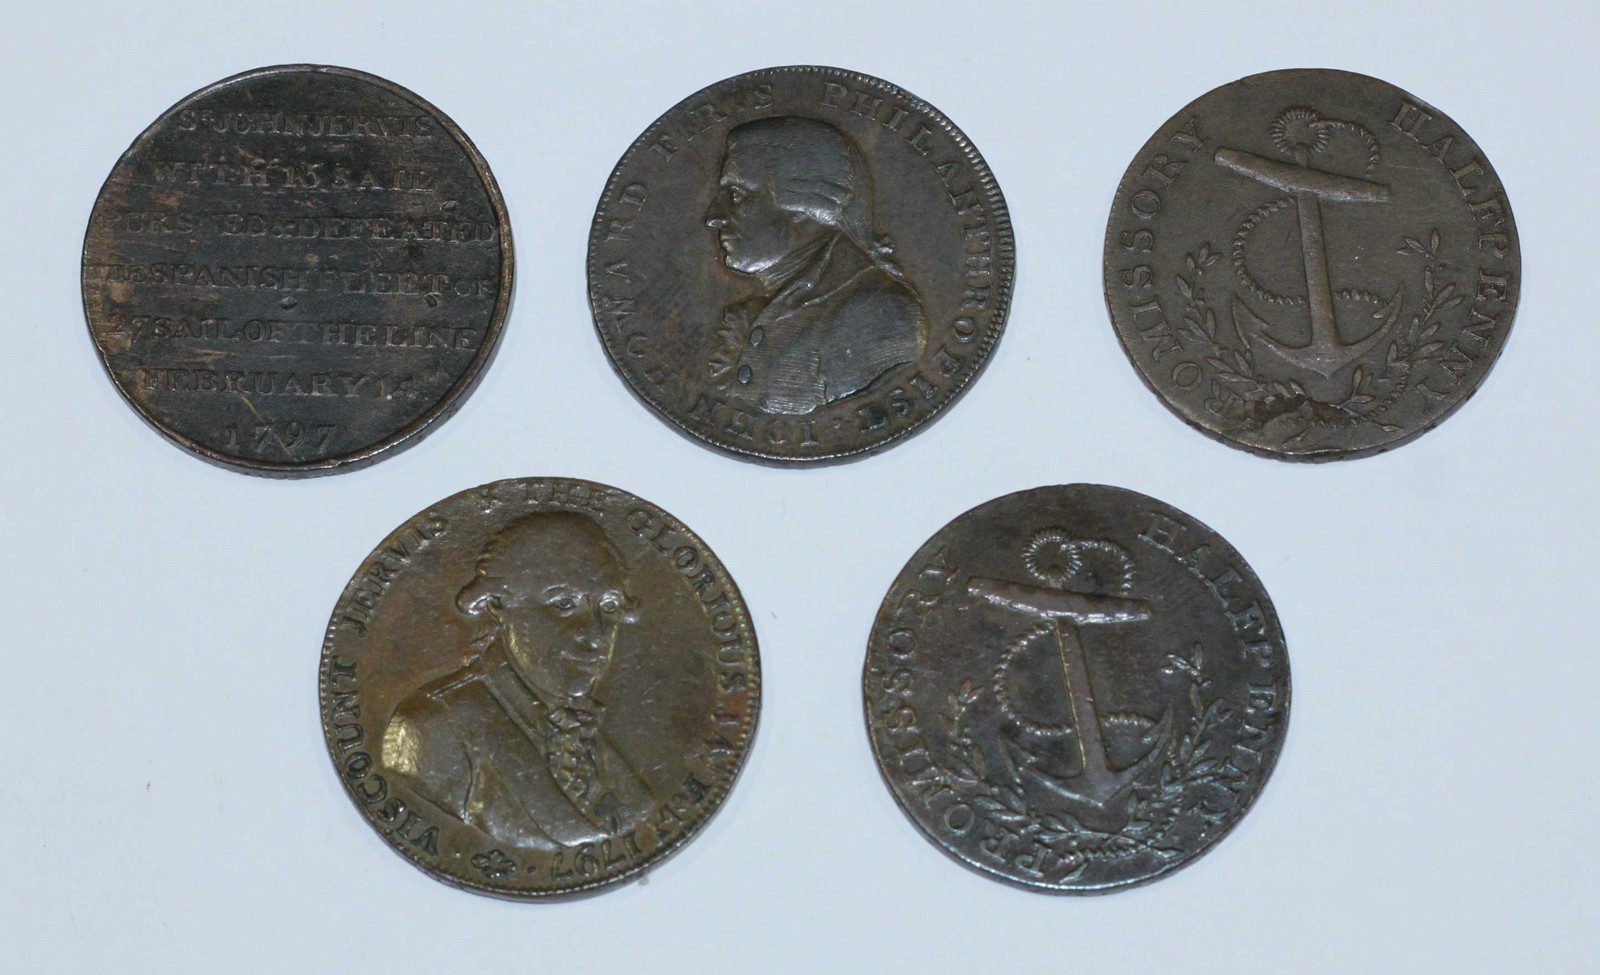 Five 18th Century Copper Halfpenny Provincial Tokens, Portsmouth, Hampshire, John Jarvis, 1797, D&